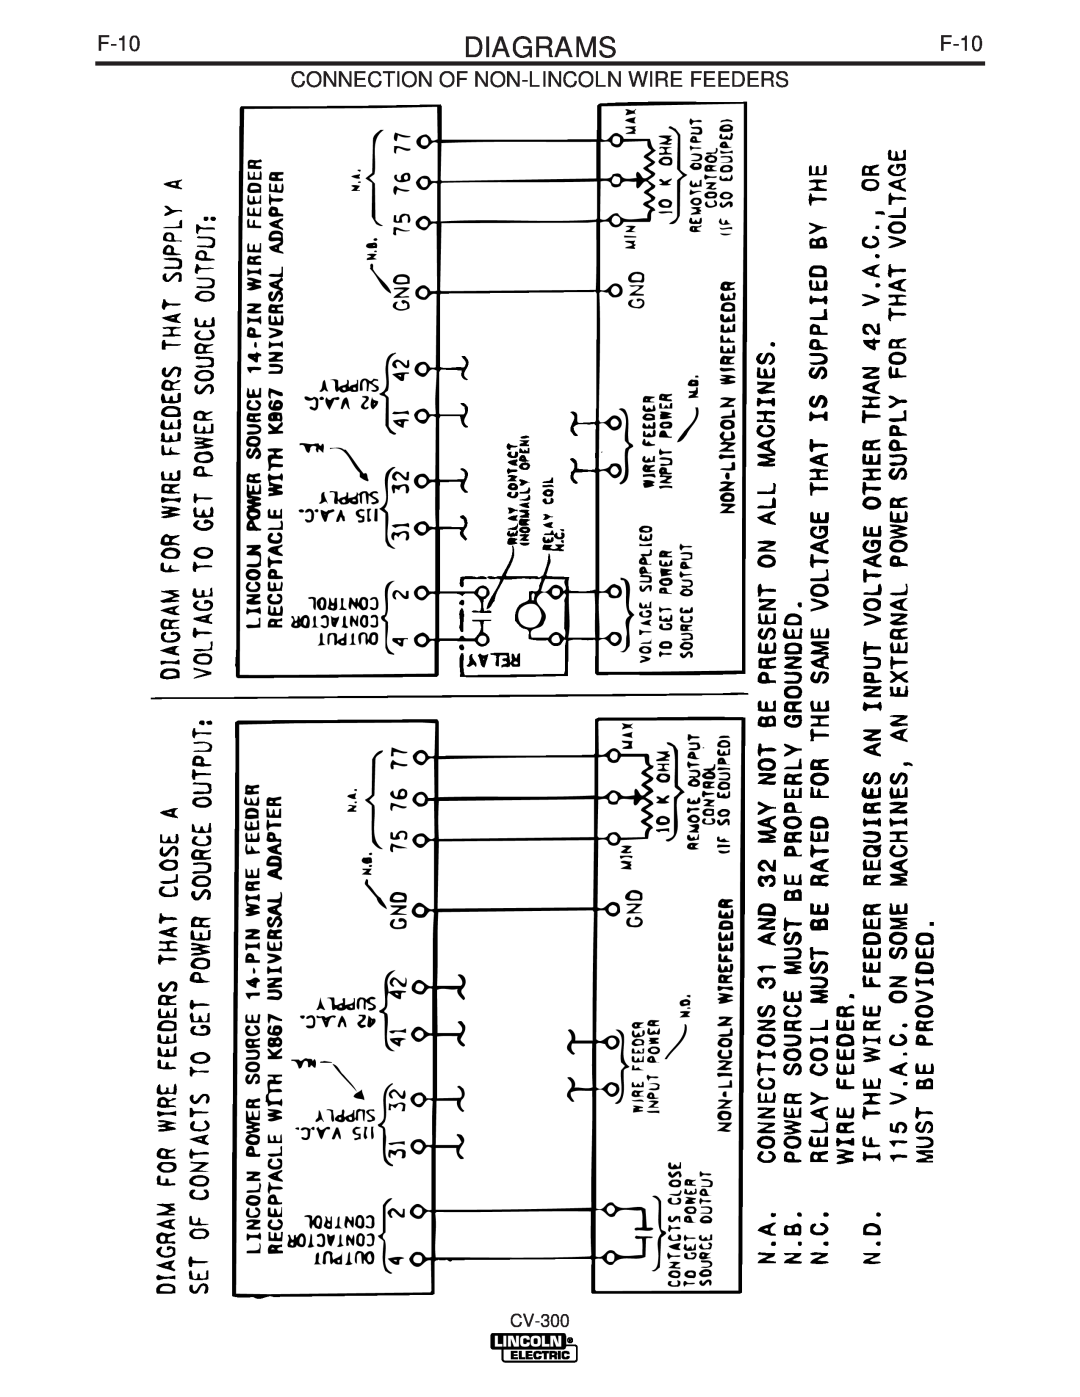 Lincoln Electric CV-300 manual Diagrams, F-10, Connection Of Non-Lincoln Wire Feeders 